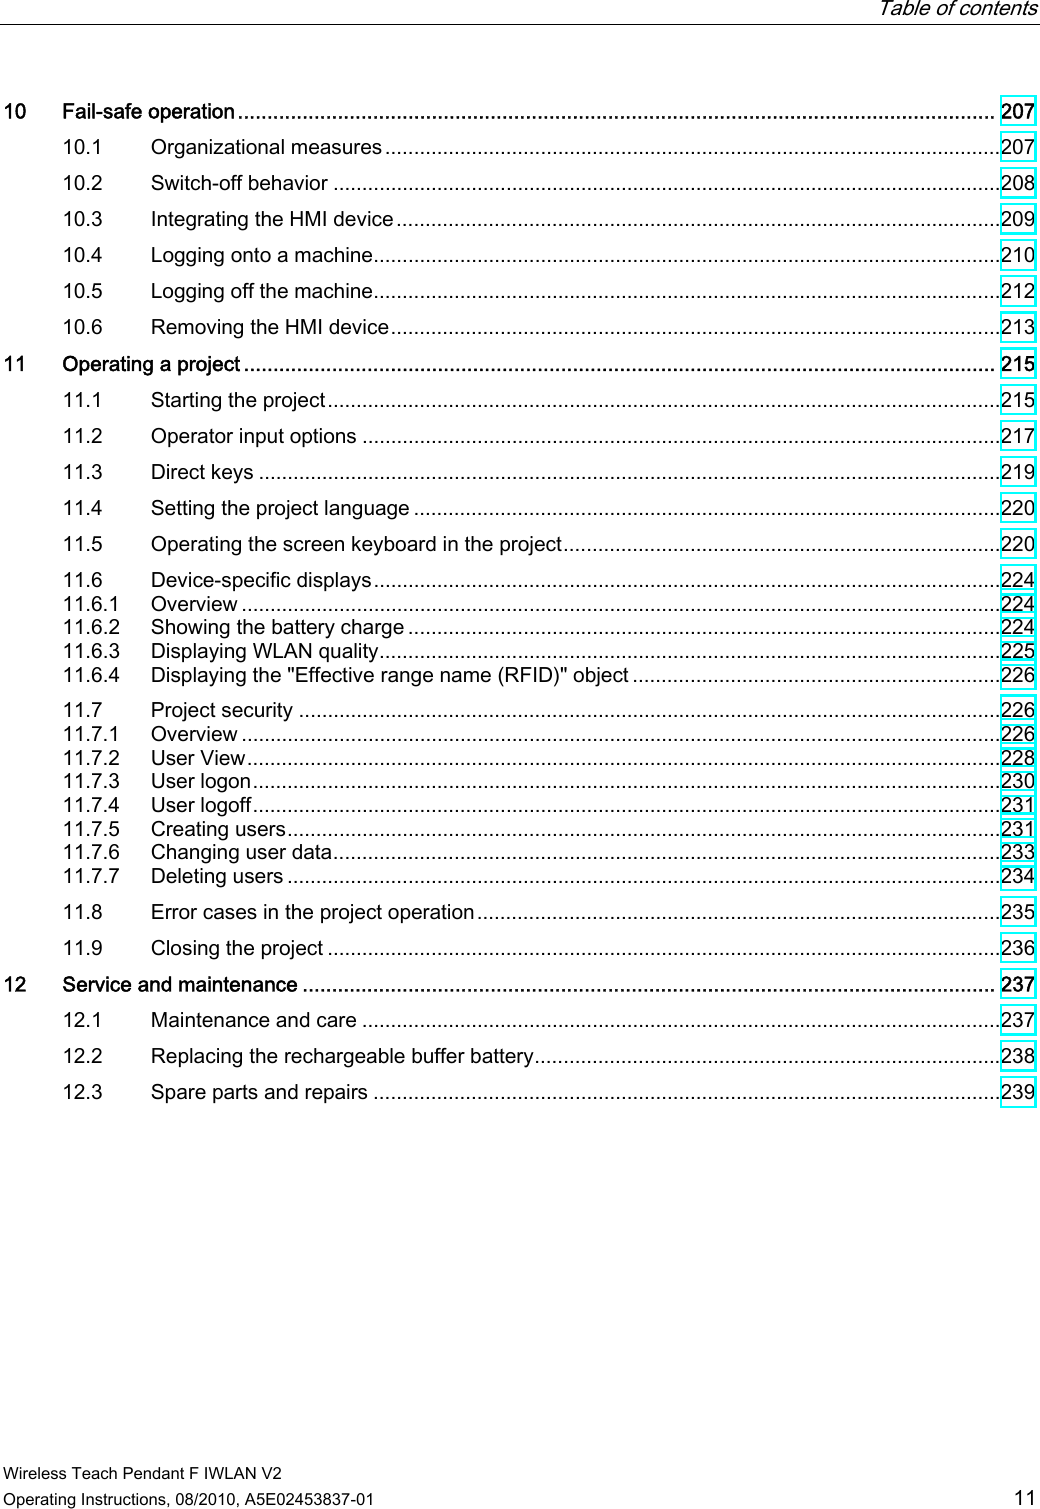   Table of contents   Wireless Teach Pendant F IWLAN V2 Operating Instructions, 08/2010, A5E02453837-01  11 10  Fail-safe operation................................................................................................................................. 207 10.1  Organizational measures ...........................................................................................................207 10.2  Switch-off behavior ....................................................................................................................208 10.3  Integrating the HMI device.........................................................................................................209 10.4  Logging onto a machine.............................................................................................................210 10.5  Logging off the machine.............................................................................................................212 10.6  Removing the HMI device..........................................................................................................213 11  Operating a project ................................................................................................................................ 215 11.1  Starting the project.....................................................................................................................215 11.2  Operator input options ...............................................................................................................217 11.3  Direct keys .................................................................................................................................219 11.4  Setting the project language ......................................................................................................220 11.5  Operating the screen keyboard in the project............................................................................220 11.6  Device-specific displays.............................................................................................................224 11.6.1  Overview ....................................................................................................................................224 11.6.2  Showing the battery charge .......................................................................................................224 11.6.3  Displaying WLAN quality............................................................................................................225 11.6.4  Displaying the &quot;Effective range name (RFID)&quot; object ................................................................226 11.7  Project security ..........................................................................................................................226 11.7.1  Overview ....................................................................................................................................226 11.7.2  User View...................................................................................................................................228 11.7.3  User logon..................................................................................................................................230 11.7.4  User logoff..................................................................................................................................231 11.7.5  Creating users............................................................................................................................231 11.7.6  Changing user data....................................................................................................................233 11.7.7  Deleting users ............................................................................................................................234 11.8  Error cases in the project operation...........................................................................................235 11.9  Closing the project .....................................................................................................................236 12  Service and maintenance ...................................................................................................................... 237 12.1  Maintenance and care ...............................................................................................................237 12.2  Replacing the rechargeable buffer battery.................................................................................238 12.3  Spare parts and repairs .............................................................................................................239 PRELIMINARY II 1.7.2010